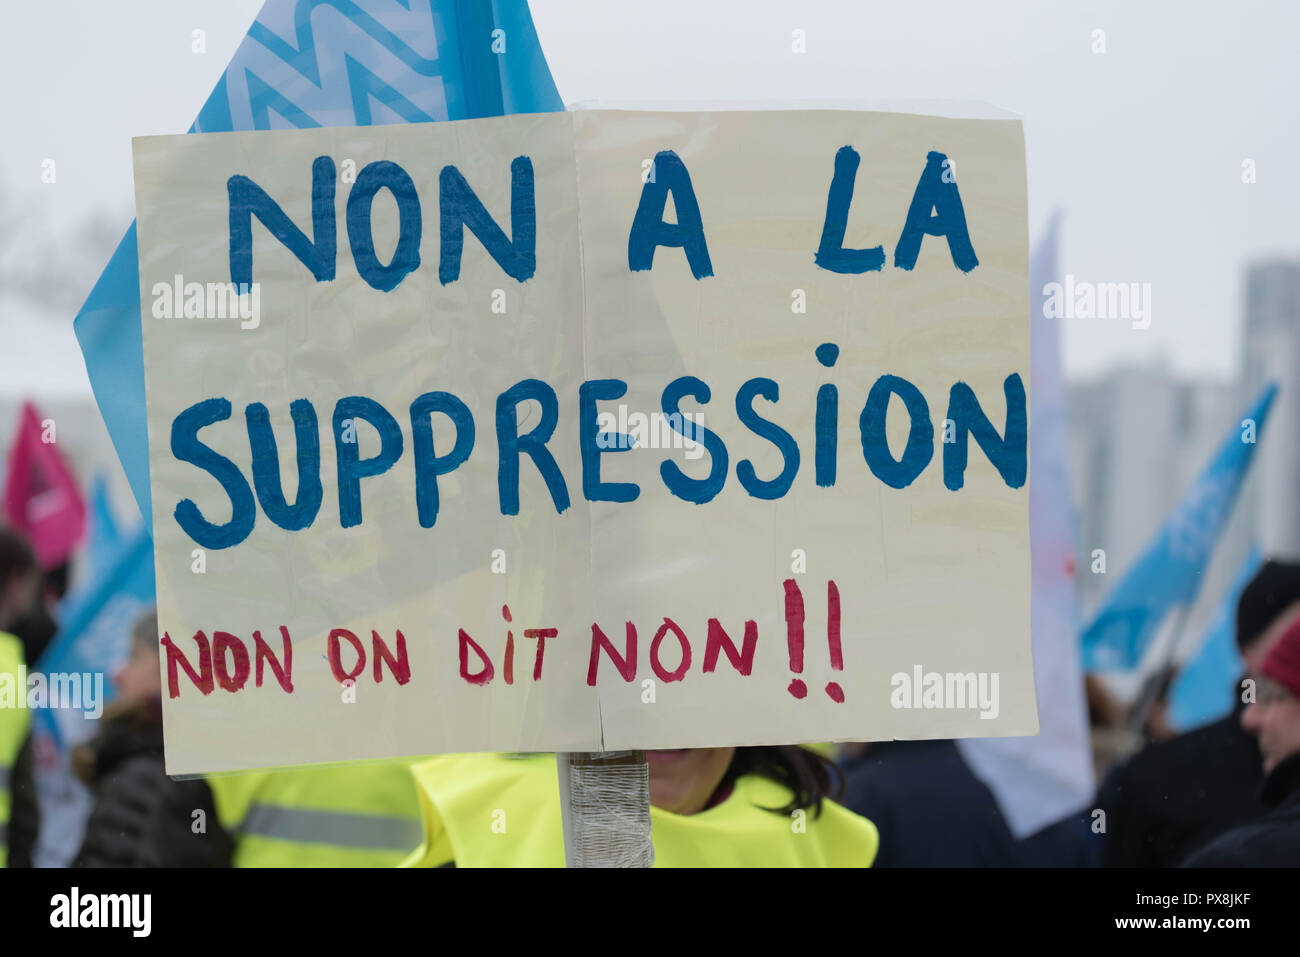 Créteil: Against the disappearance of the department of val-de-marne and its local public services Stock Photo